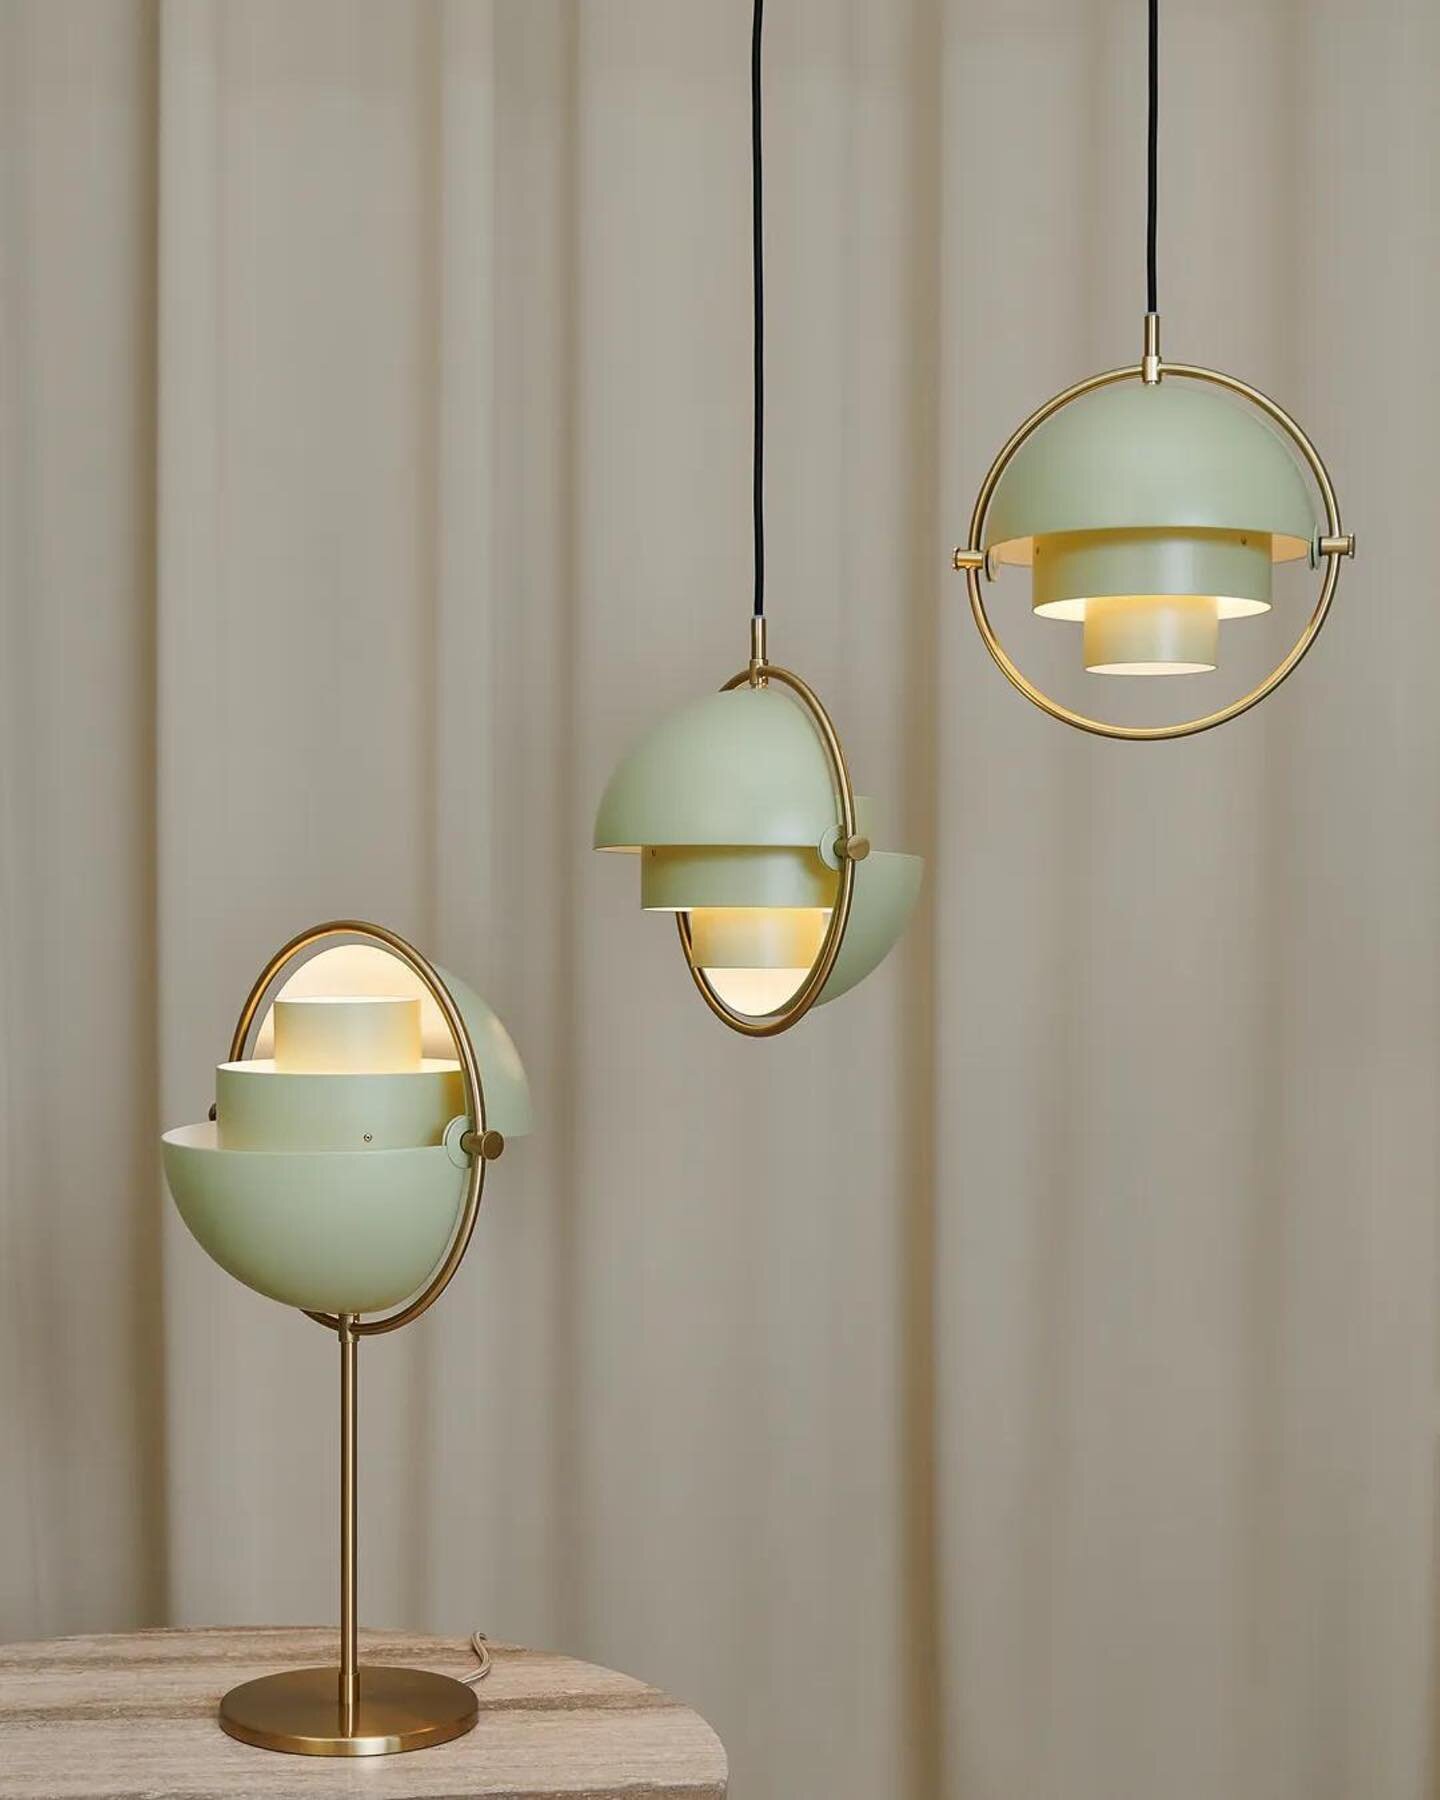 The Multi-Lite Collection by @gubiofficial is a tribute to the 'golden era' of Danish design! These adaptable and characterful lamps feature two unique shades that steal the show in any room. You can customize the lighting with a metal ring, two conc